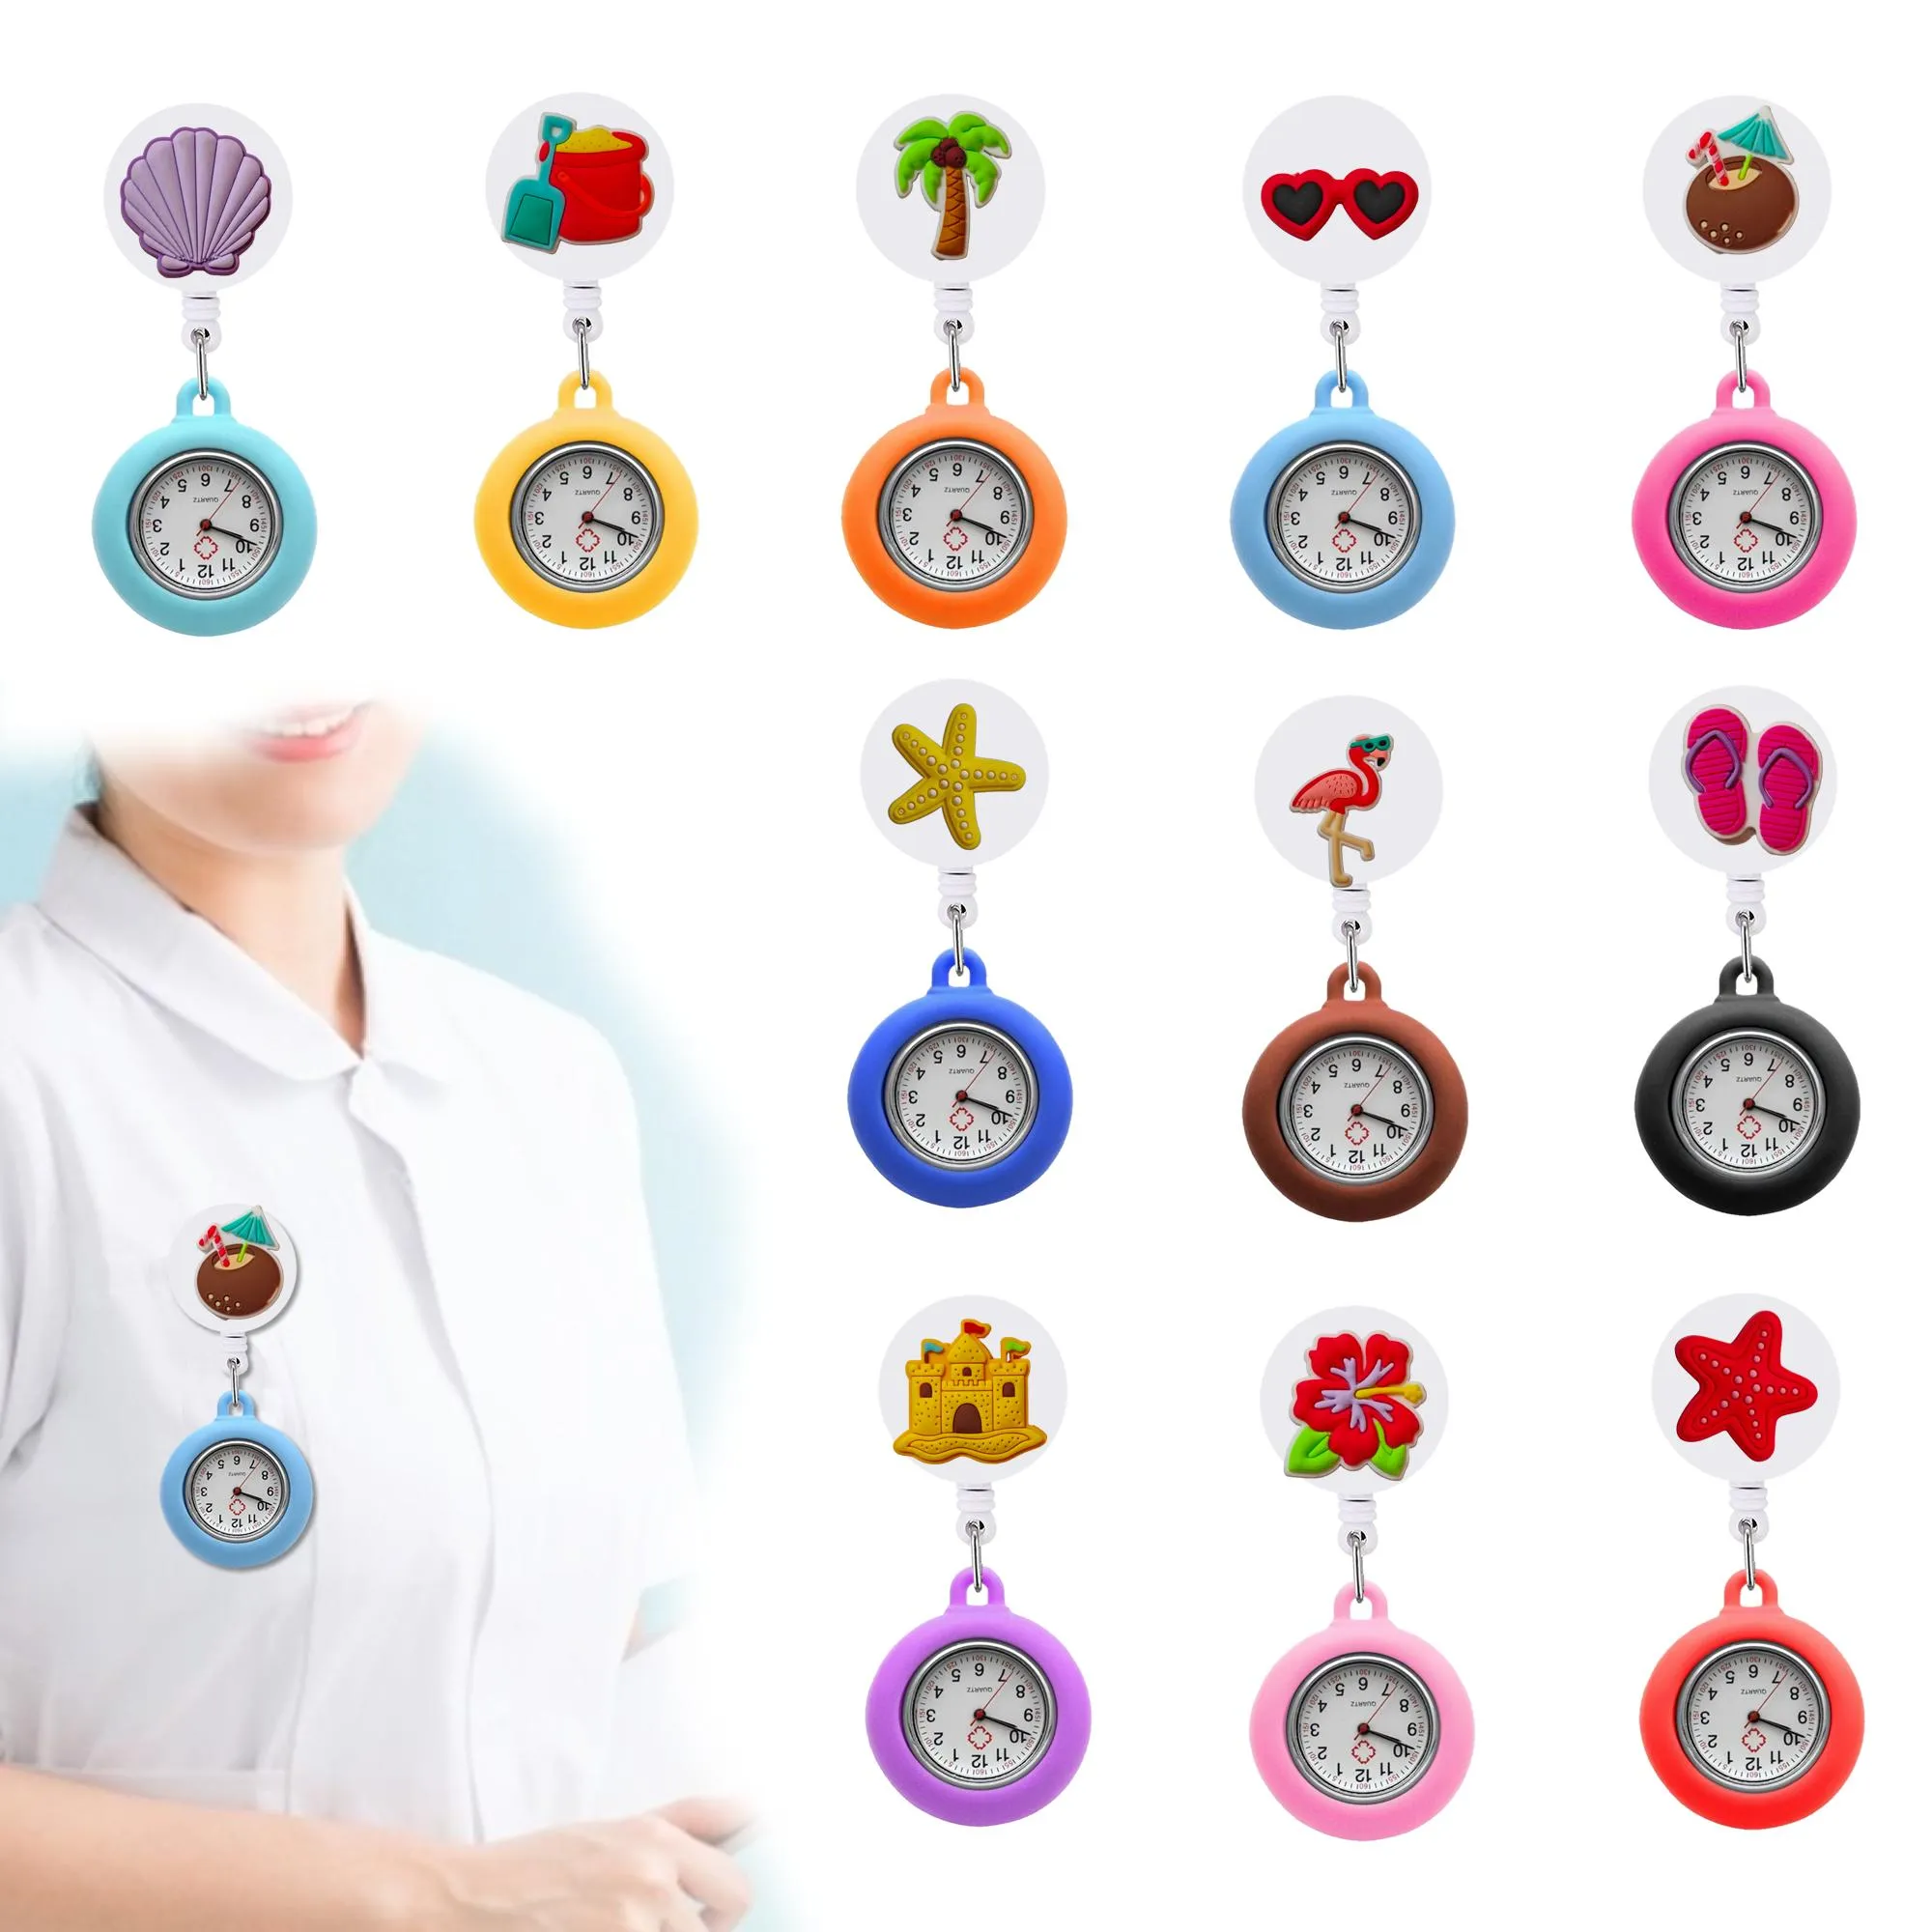 Pocket Watches Summer Seaside Clip Brooch Quartz Movement Stethoscope Retractable Fob Watch Nurse Lapel For Women On Drop Delivery Otwif